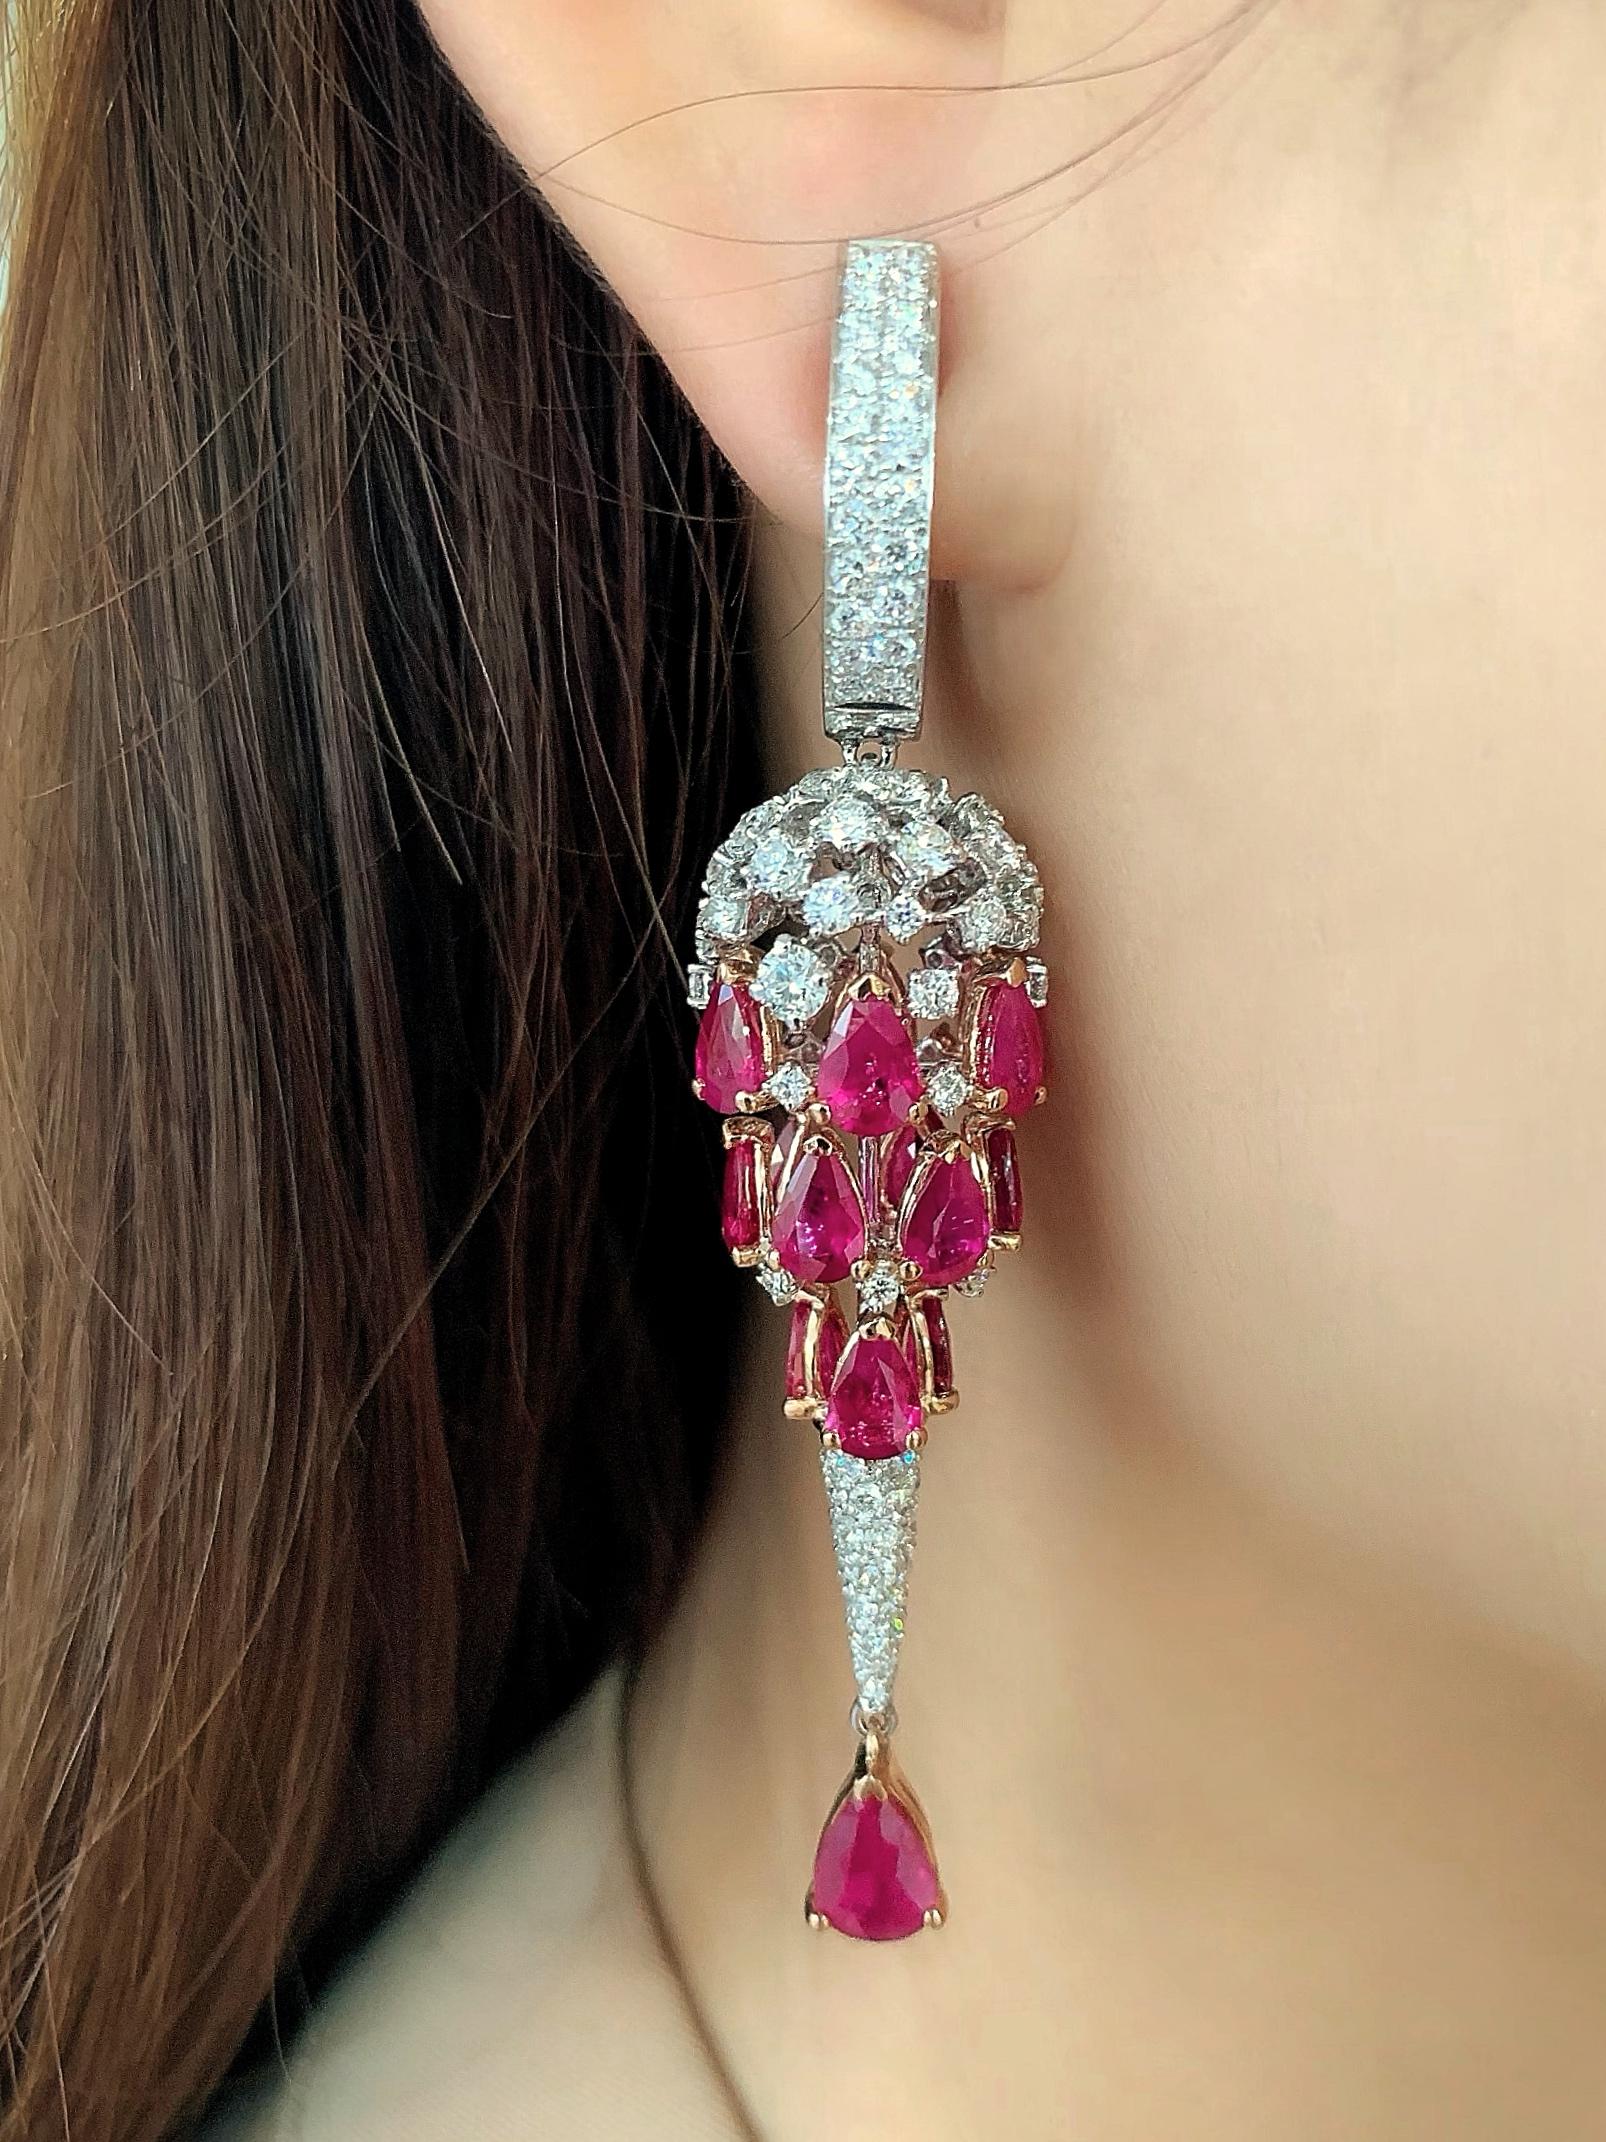 Butani's earrings are encrusted with over 230 brilliant-cut diamonds (totaling 4.79 carats) and 32 striking pear-cut rubies (totaling 14.93 carats) that perfectly accentuate the chandelier design.  Handcrafted in 18 karat white and yellow gold, the